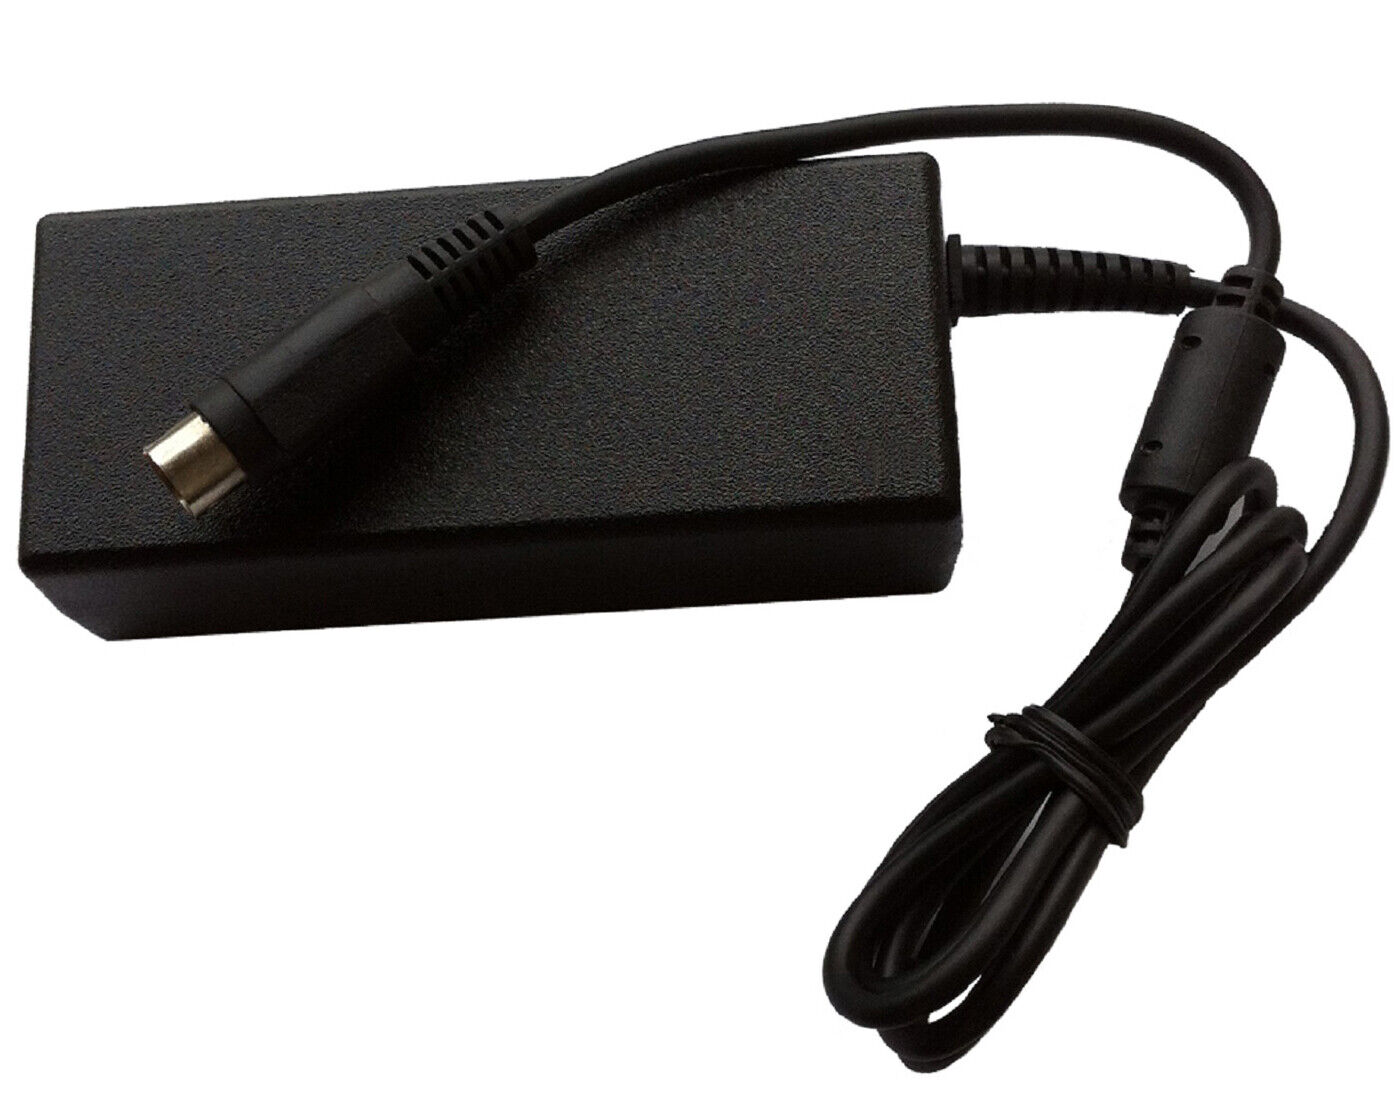 6-Pin AC Adapter For RS # RS-1203/0503-S335 RS-12030503-S335 12V 5V Power Supply Connection Split/Duplication 1:2 Type